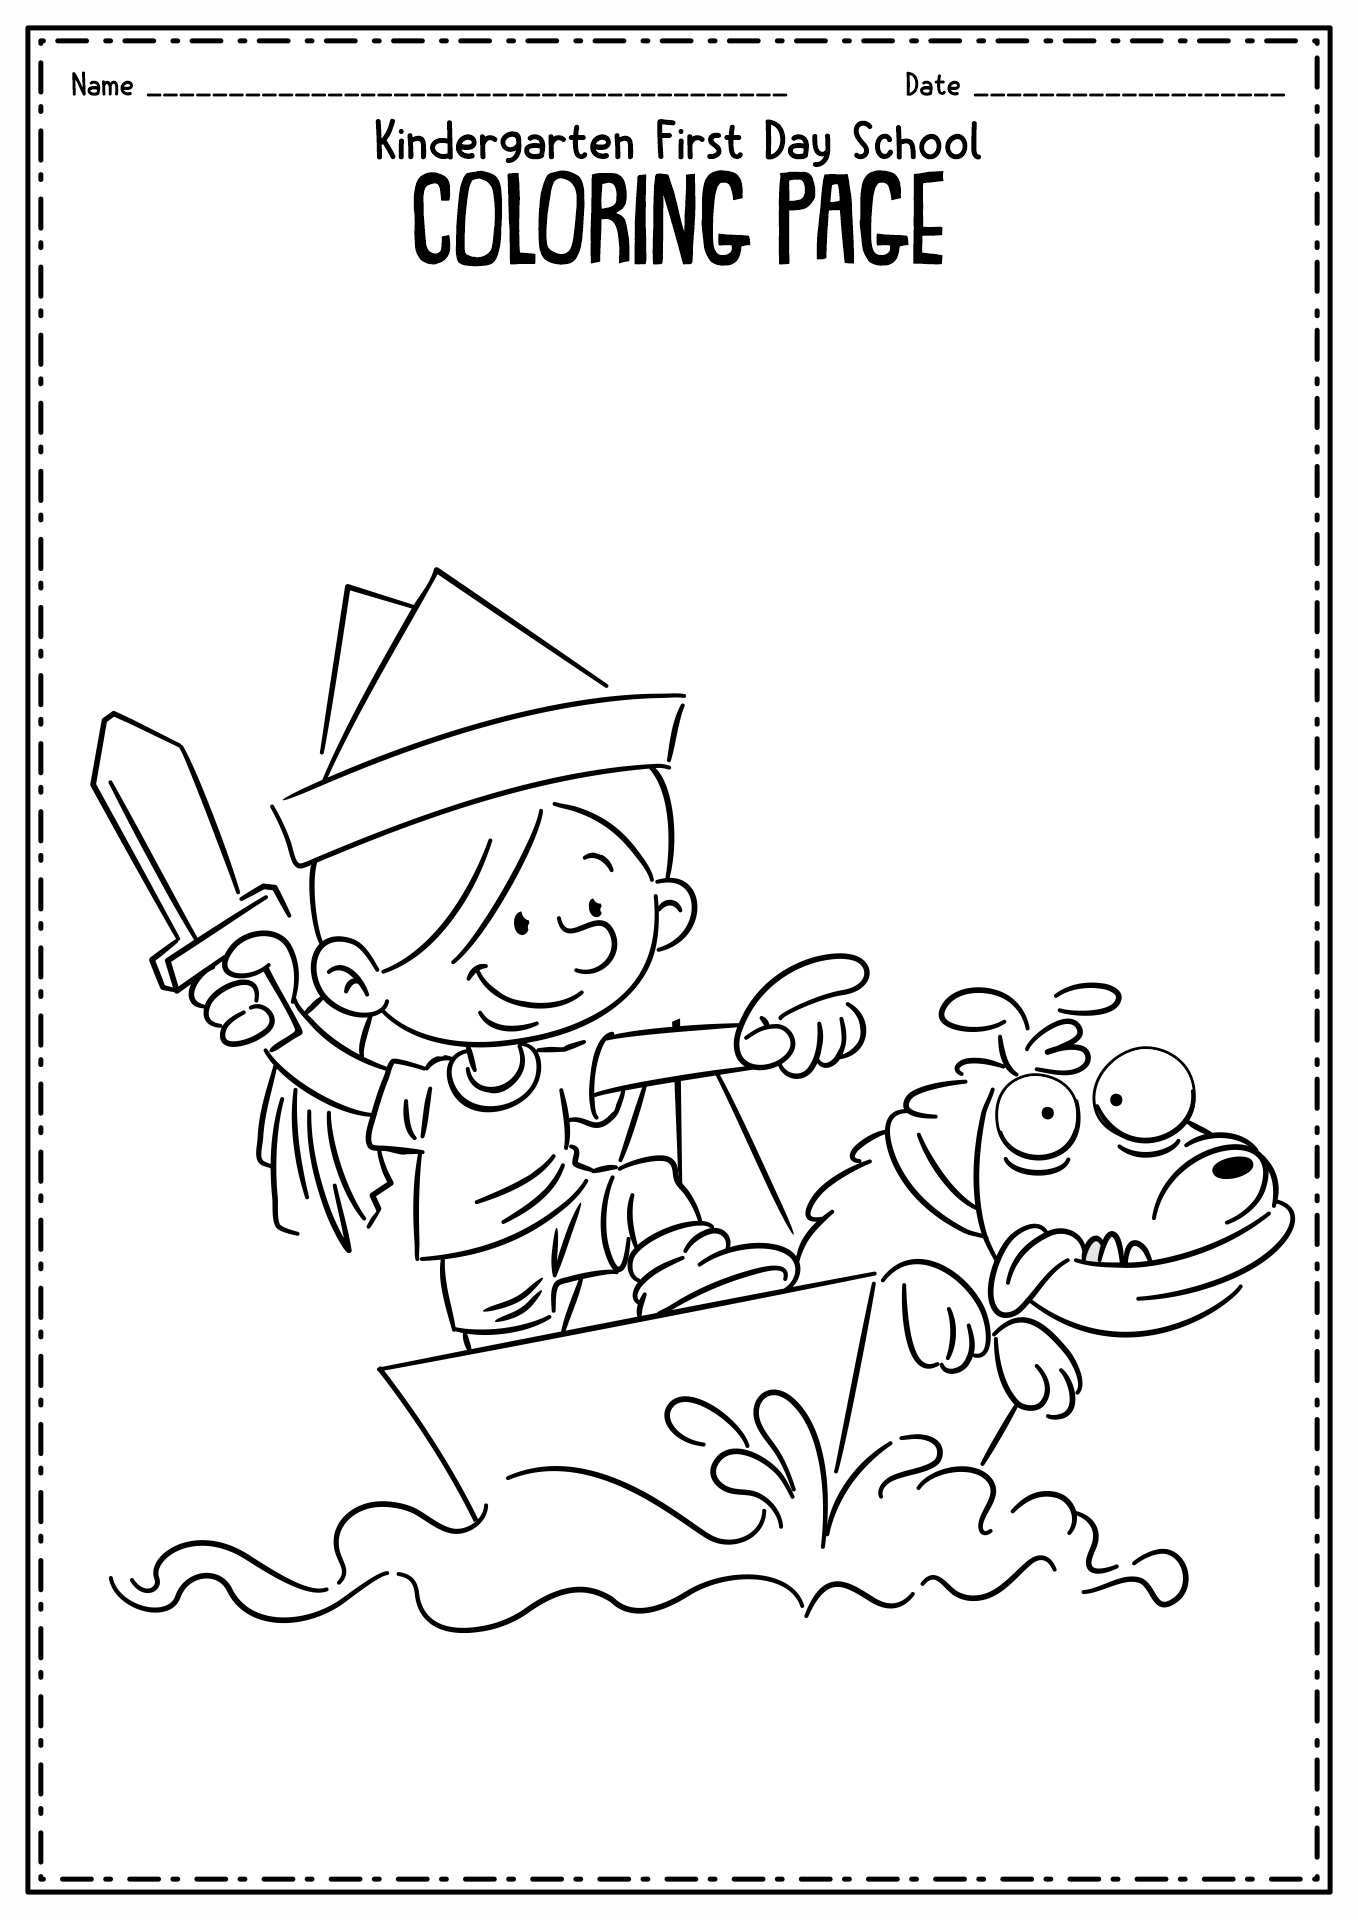 First Day School Kindergarten Coloring Pages Image